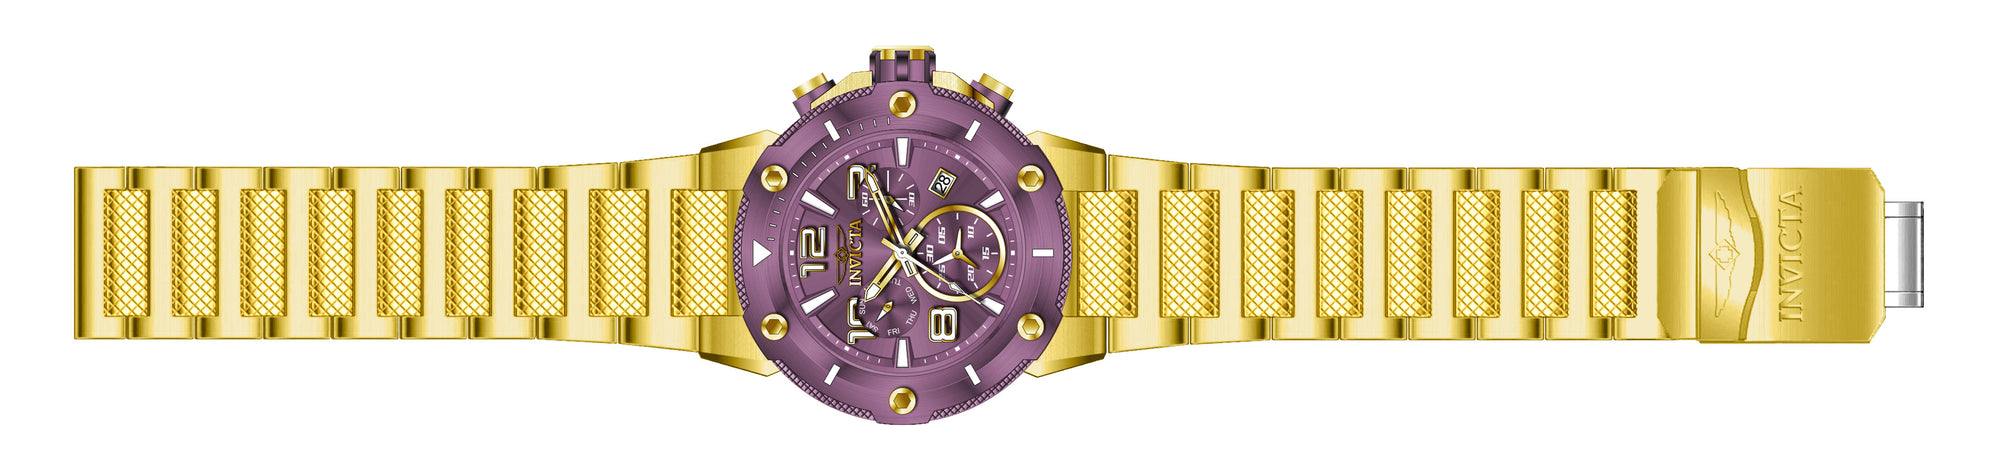 Band for Invicta Speedway Men 40625